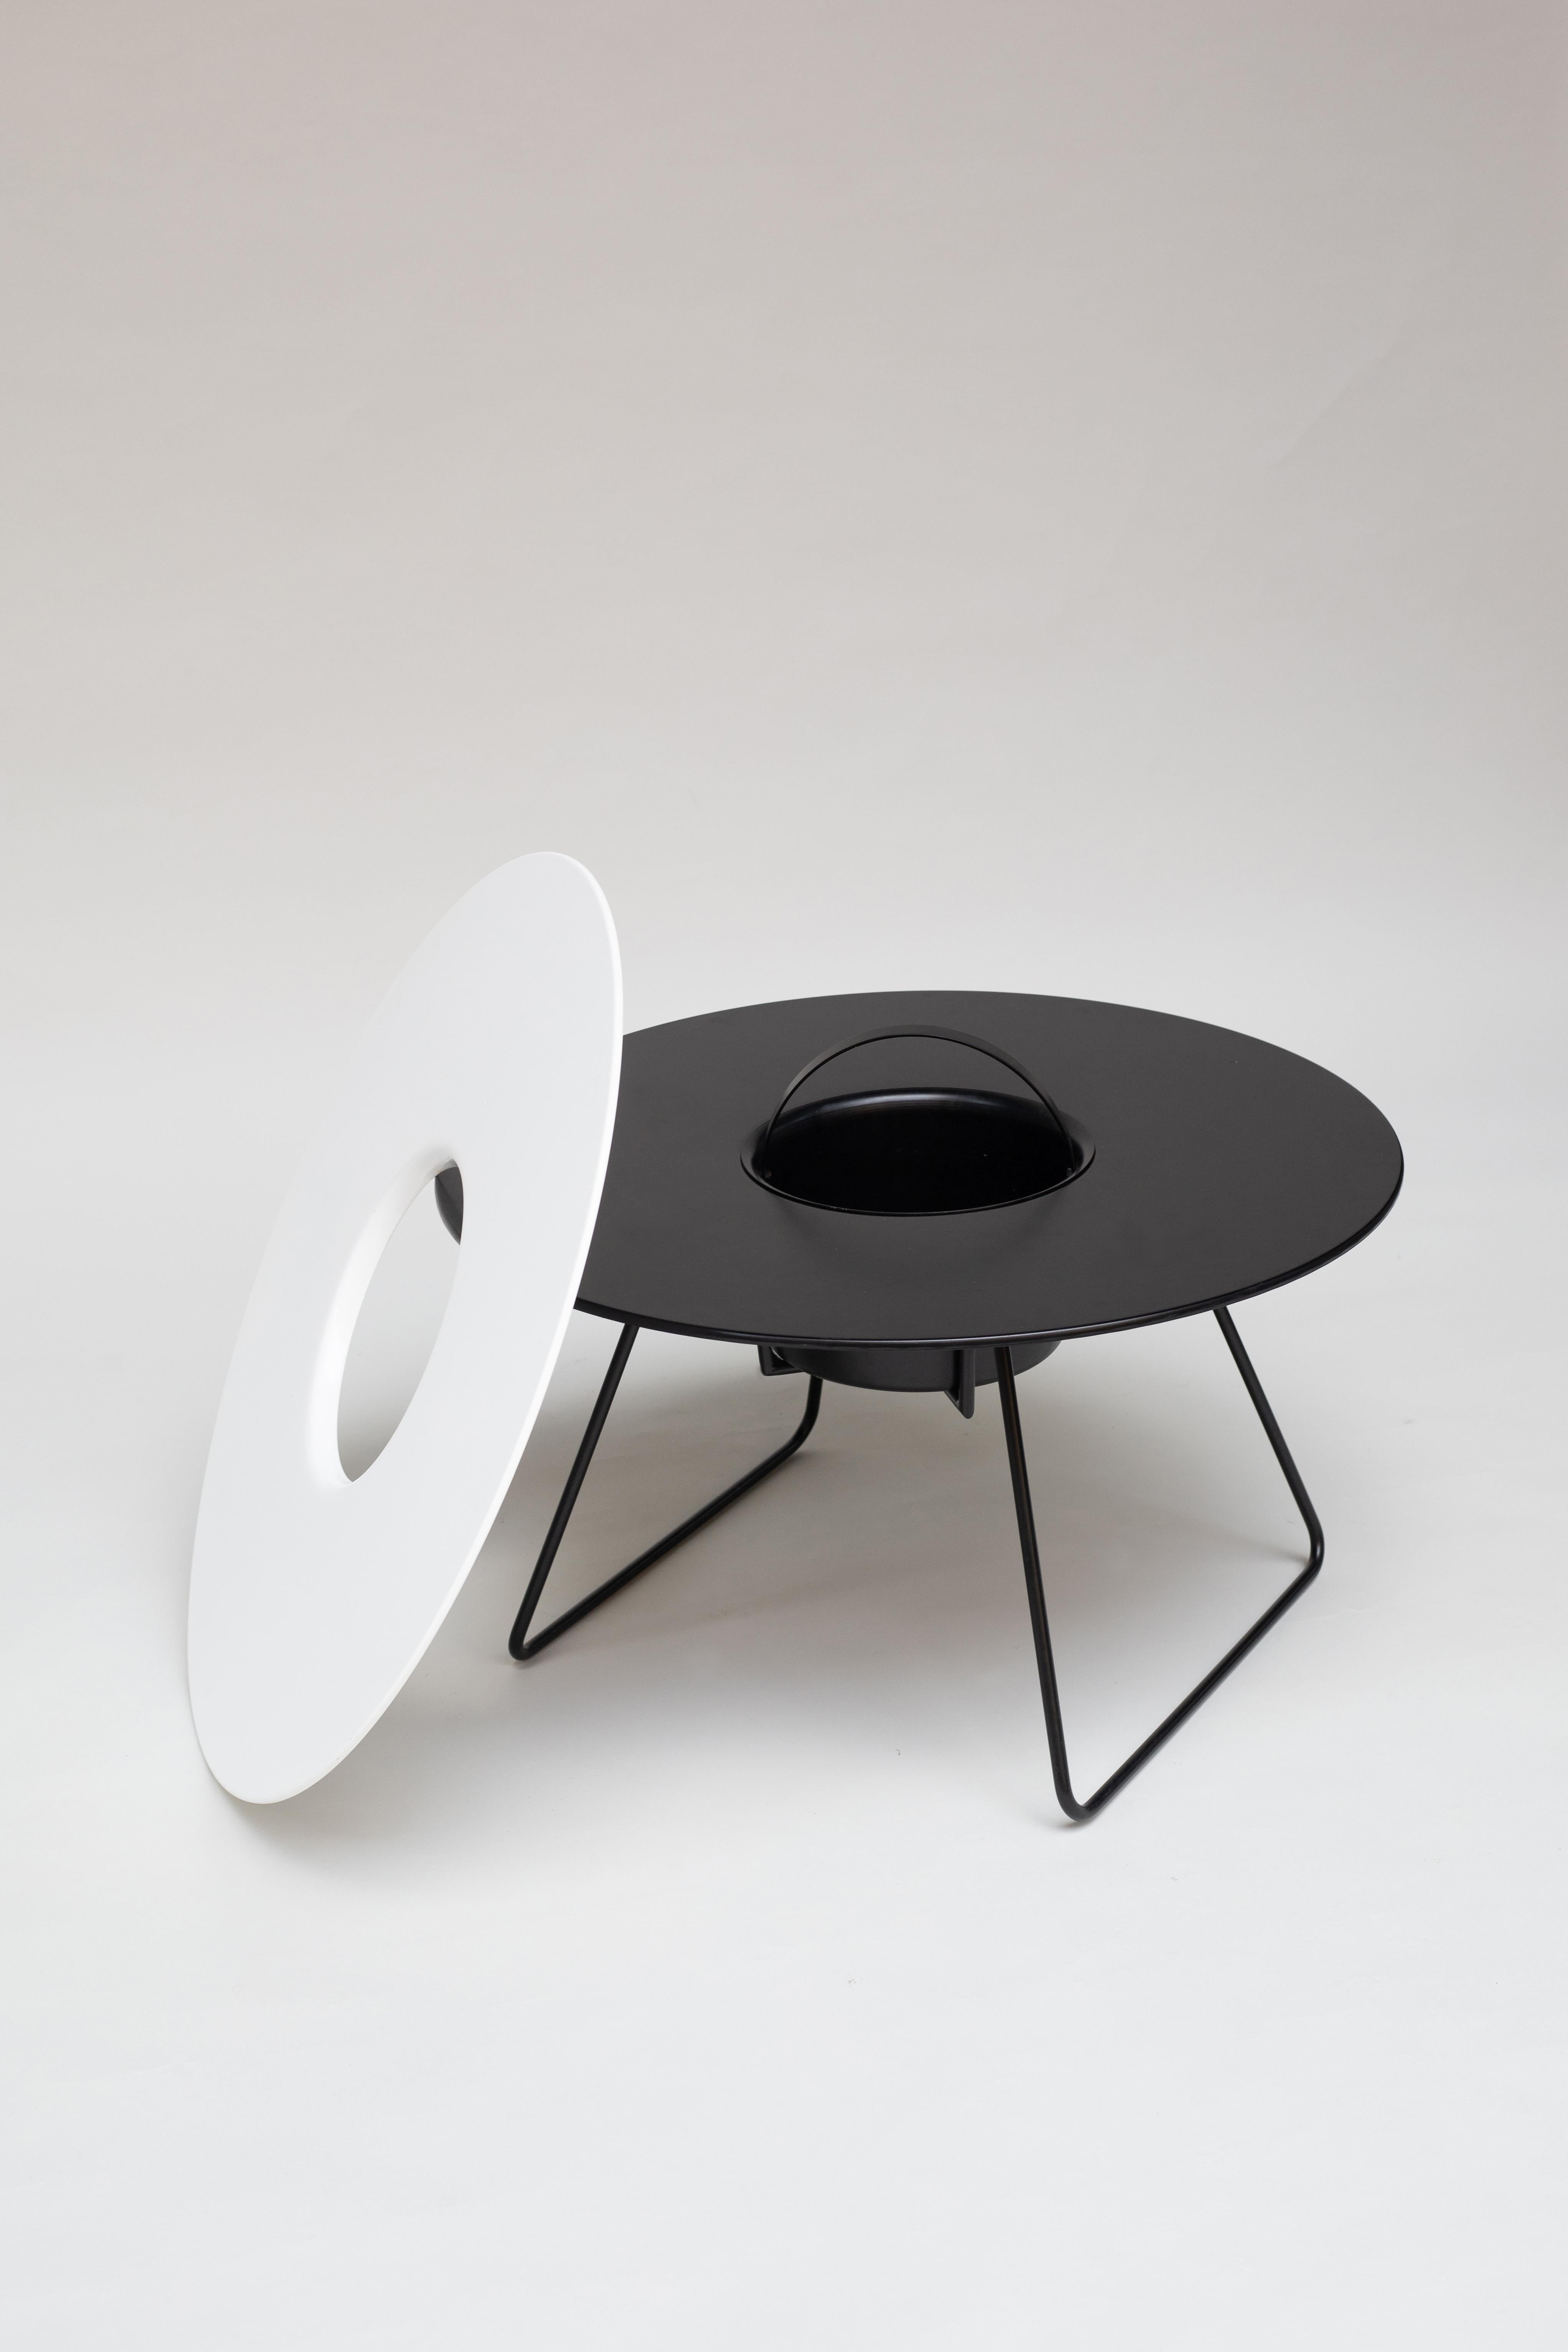 N'ice cocktail table by Cools Collection
Materials: Steel, paint, aluminium.
Dimensions: Table: Ø 75 x H 42 cm. Bucket: Bucket: Ø 26 x H 16 cm.
Available in black or white table top.

COOLS Collection was launched in 2020 by mother-and-daughter